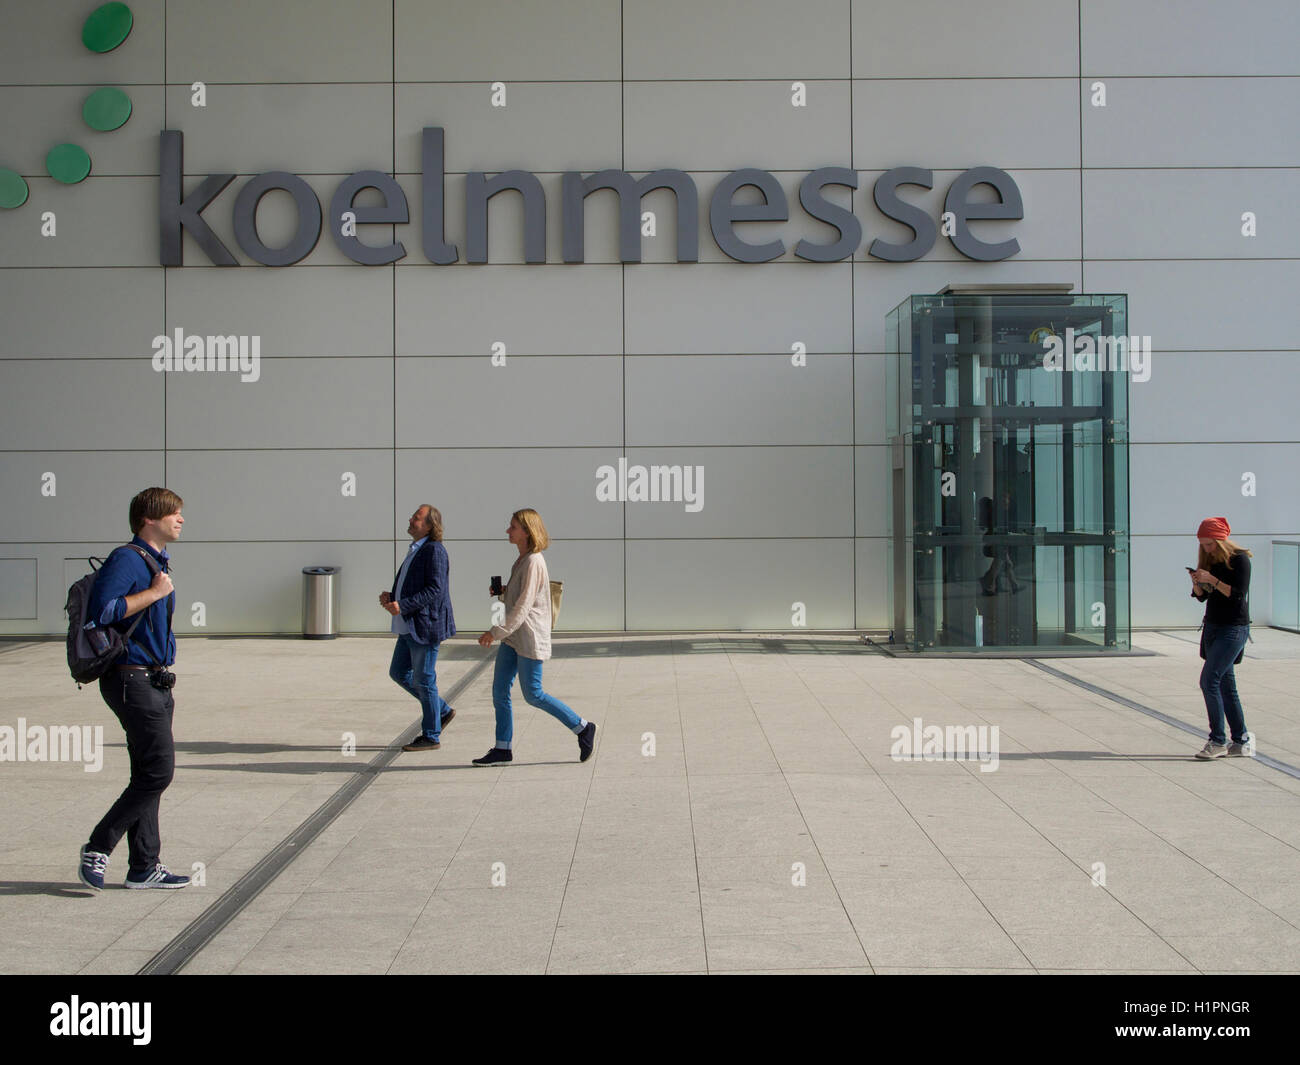 Koeln Messe entrance name sign with people in Cologne, Germany Stock Photo